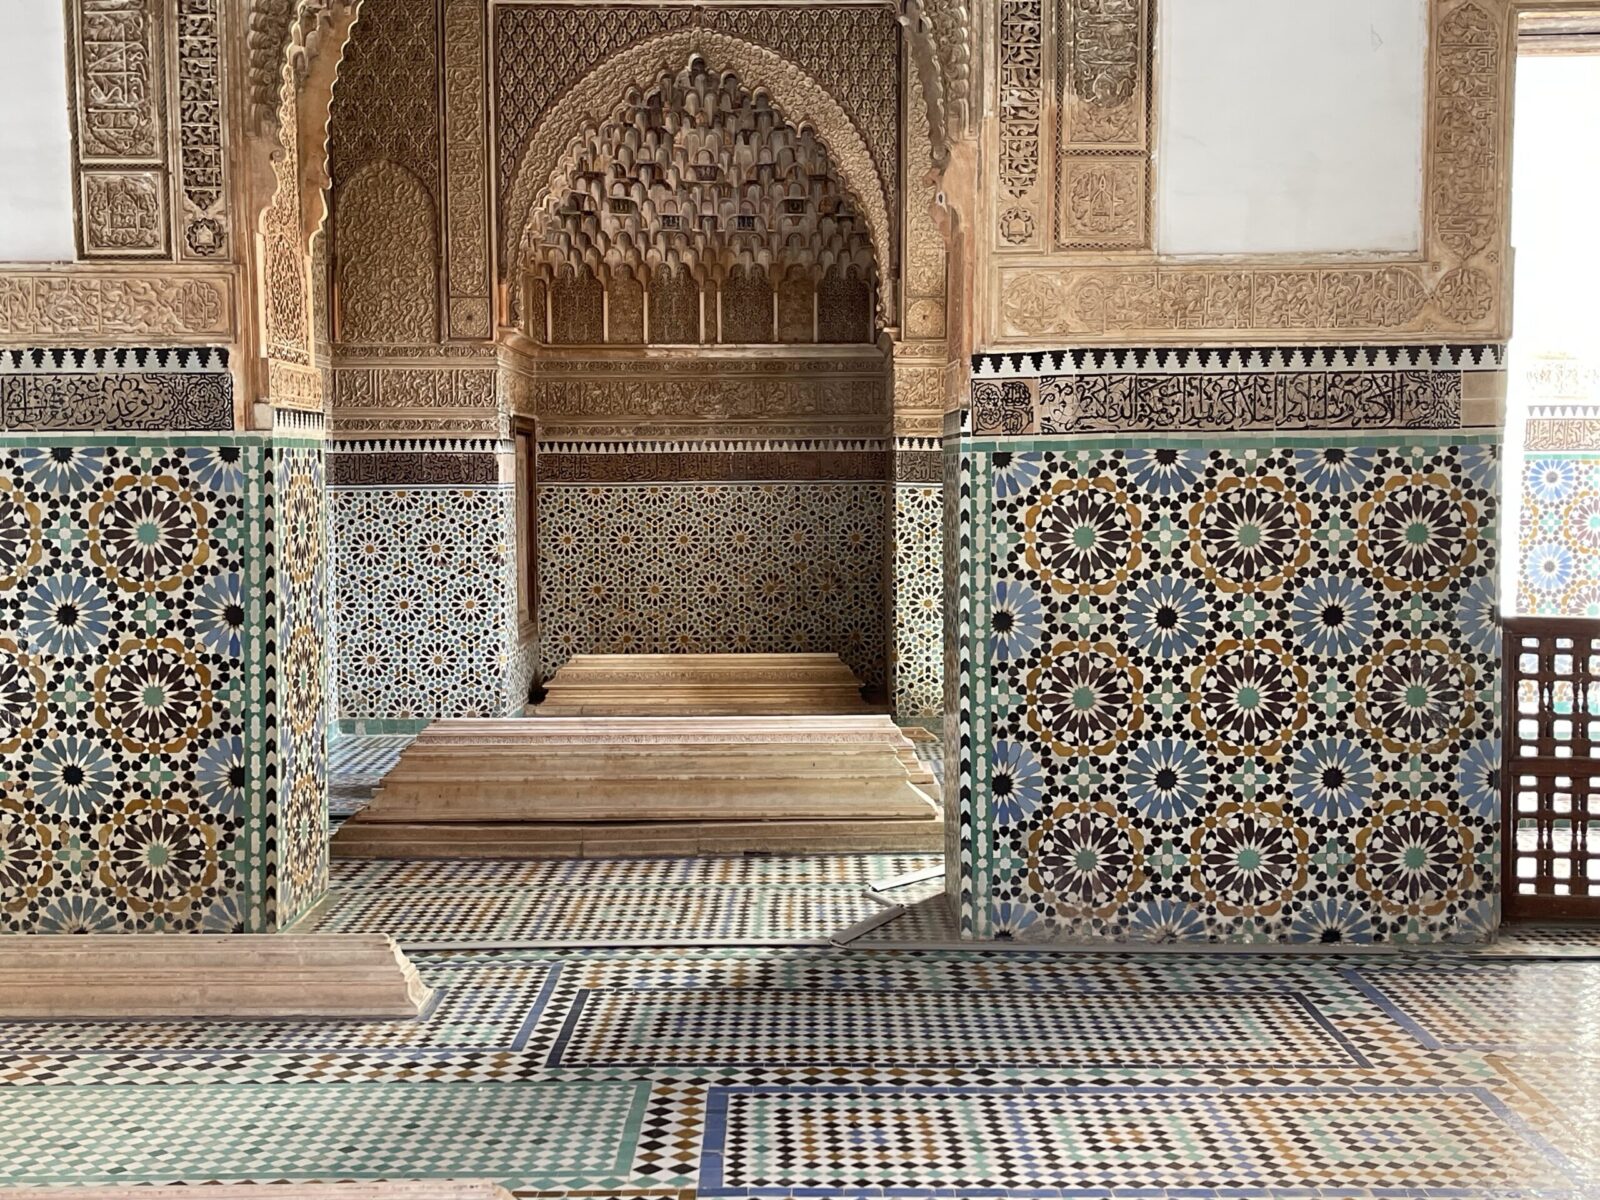 tile work covering the walls and ceiling of the Saadian Tombs in Marrackech